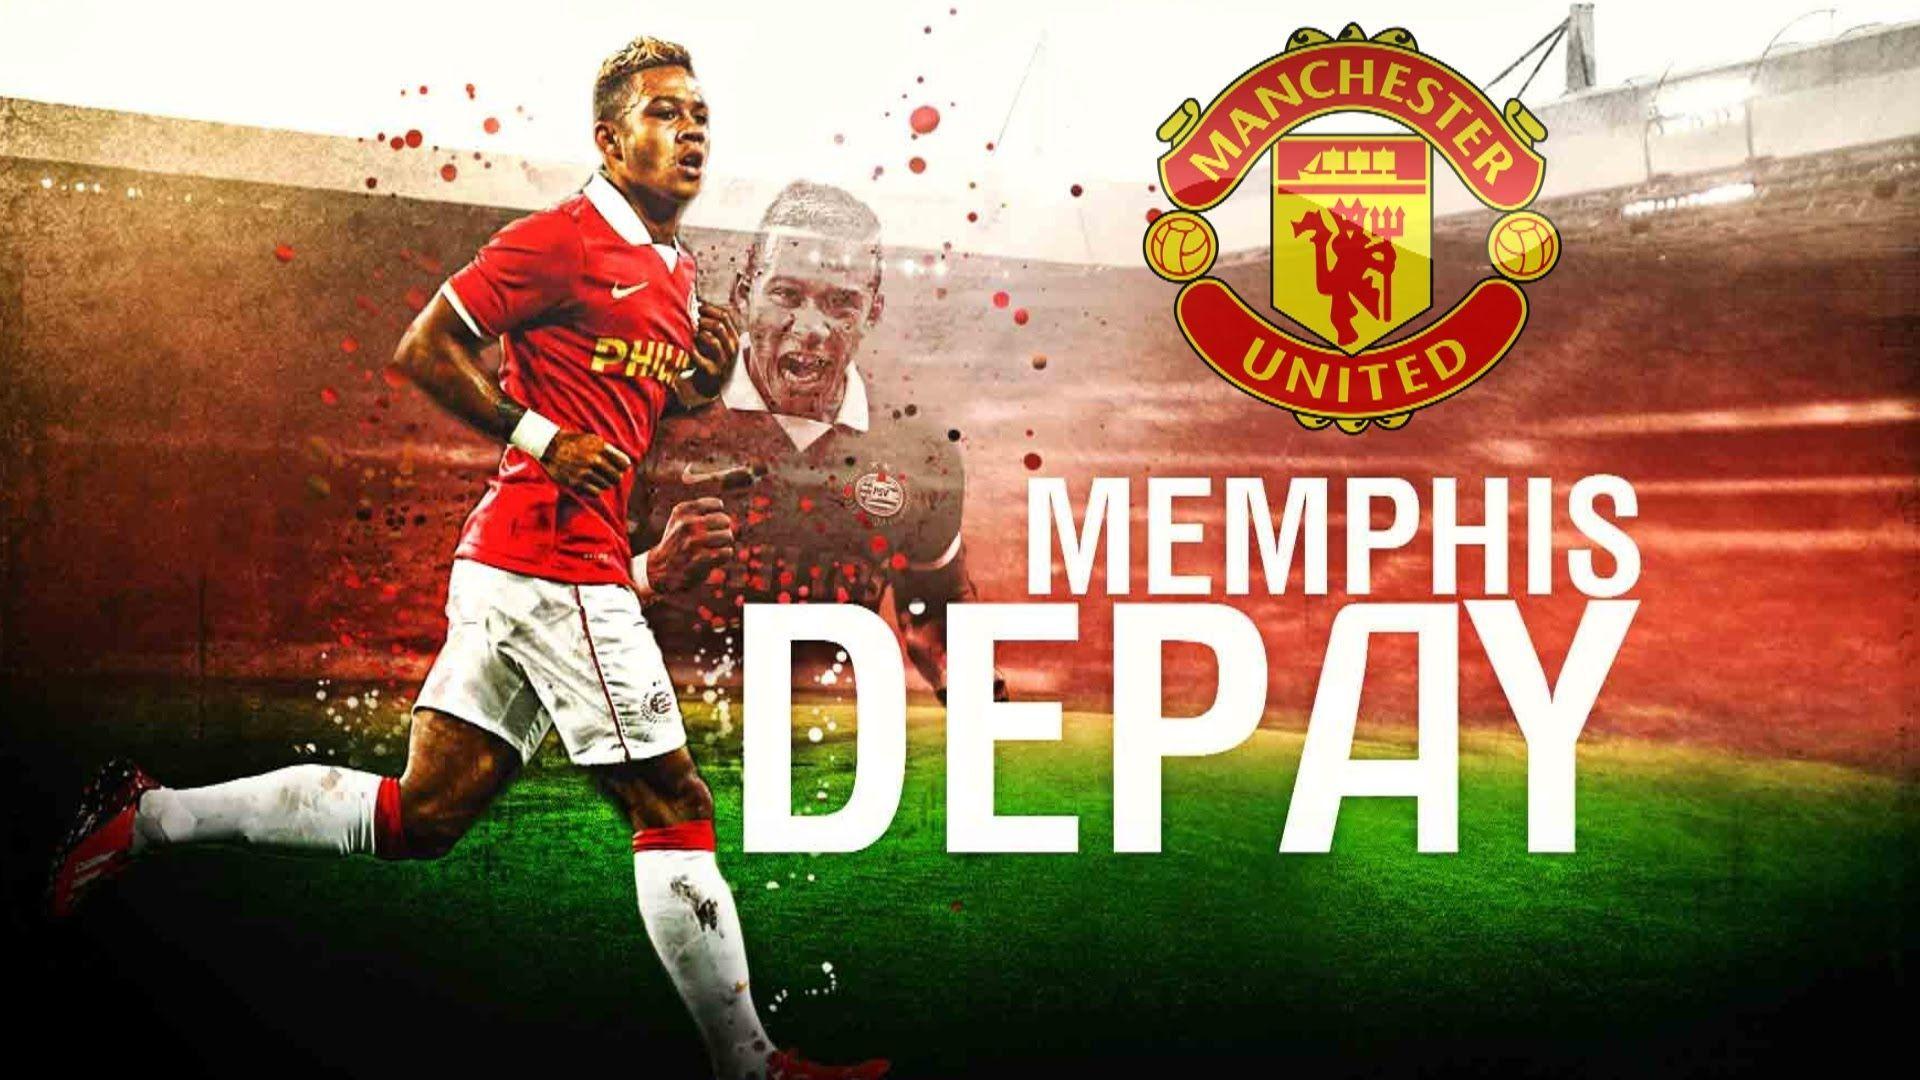 Manchester United Wallpaper HD. Wallpaper, Background, Image